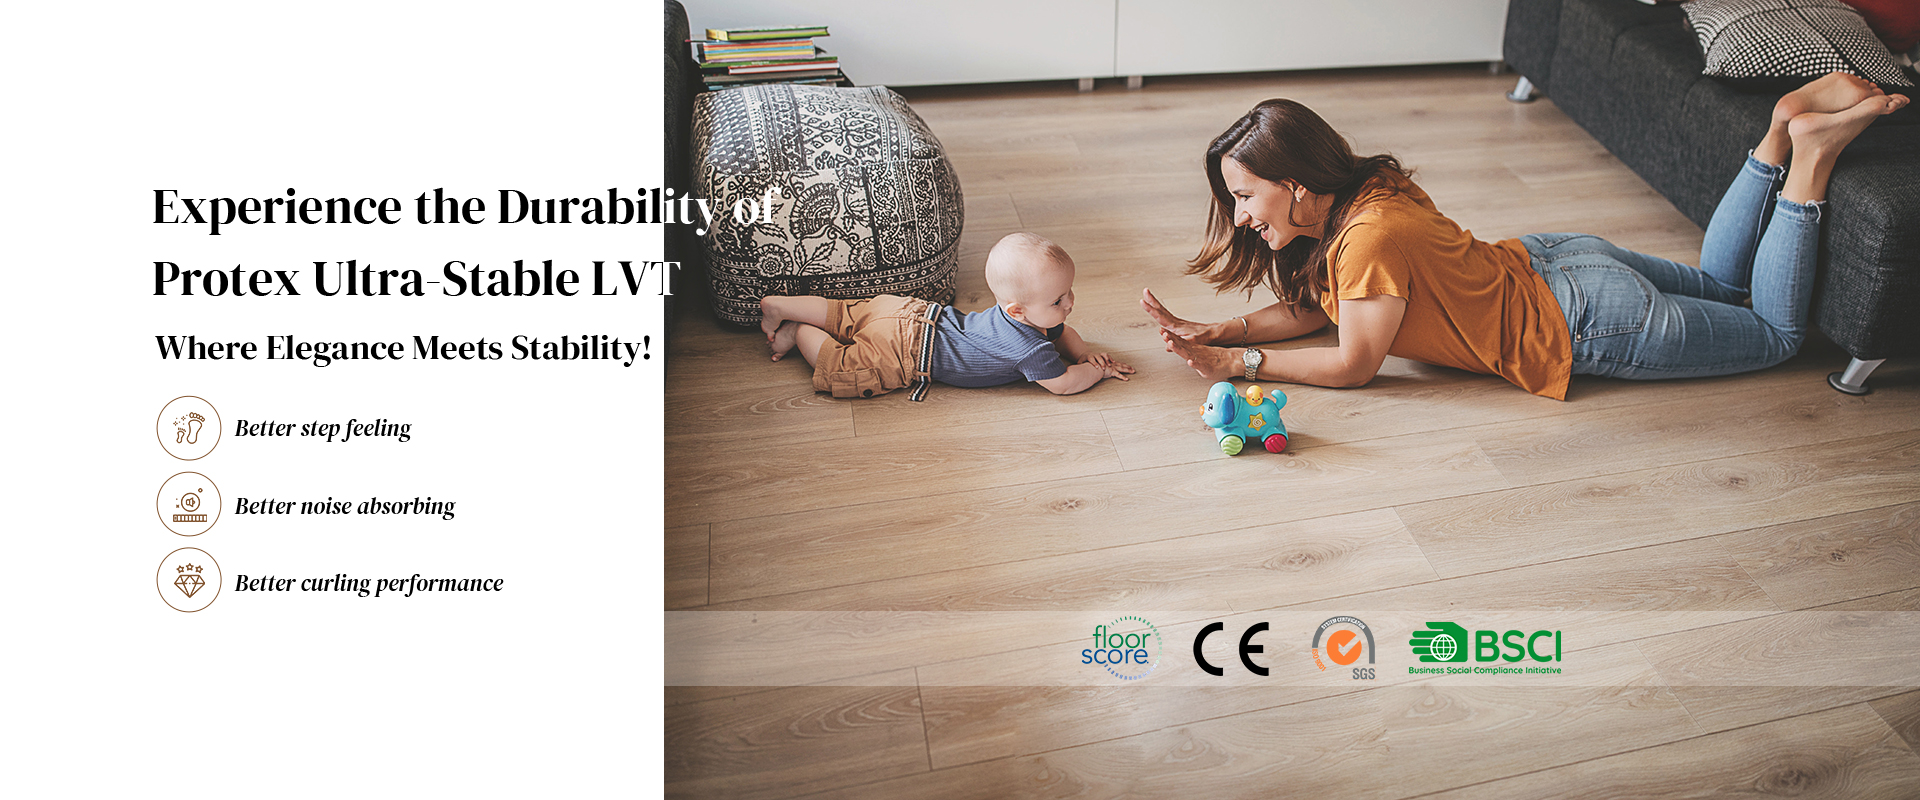 Experience-the-Durability-of-Protex-Ultra-Stable-LVT-–-Where-Elegance-Meets-Stability!